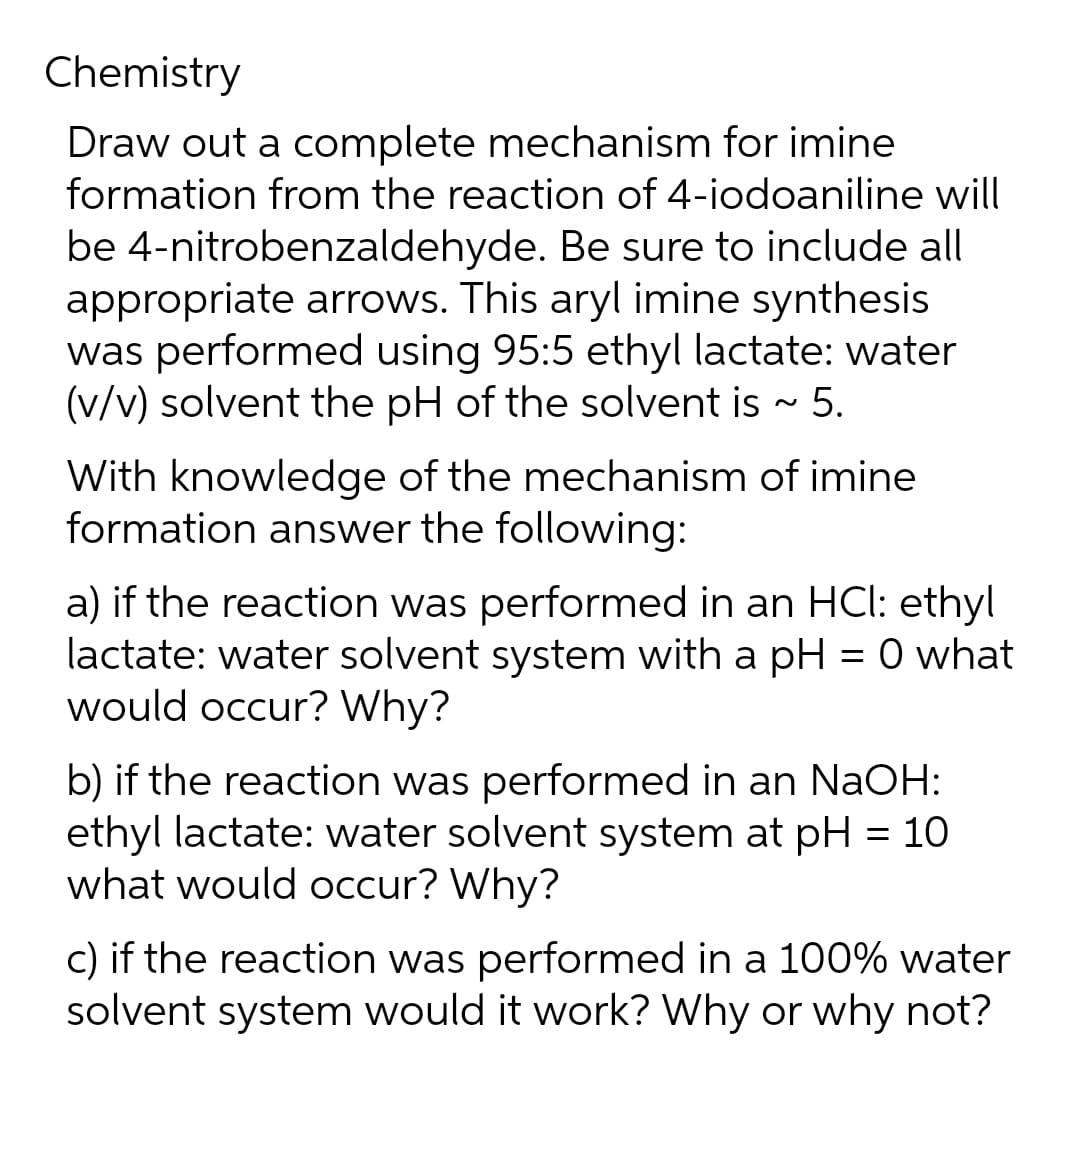 Chemistry
Draw out a complete mechanism for imine
formation from the reaction of 4-iodoaniline will
be 4-nitrobenzaldehyde. Be sure to include all
appropriate arrows. This aryl imine synthesis
was performed using 95:5 ethyl lactate: water
(v/v) solvent the pH of the solvent is ~ 5.
With knowledge of the mechanism of imine
formation answer the following:
a) if the reaction was performed in an HCl: ethyl
lactate: water solvent system with a pH = 0 what
would occur? Why?
b) if the reaction was performed in an NaOH:
ethyl lactate: water solvent system at pH = 10
what would occur? Why?
c) if the reaction was performed in a 100% water
solvent system would it work? Why or why not?